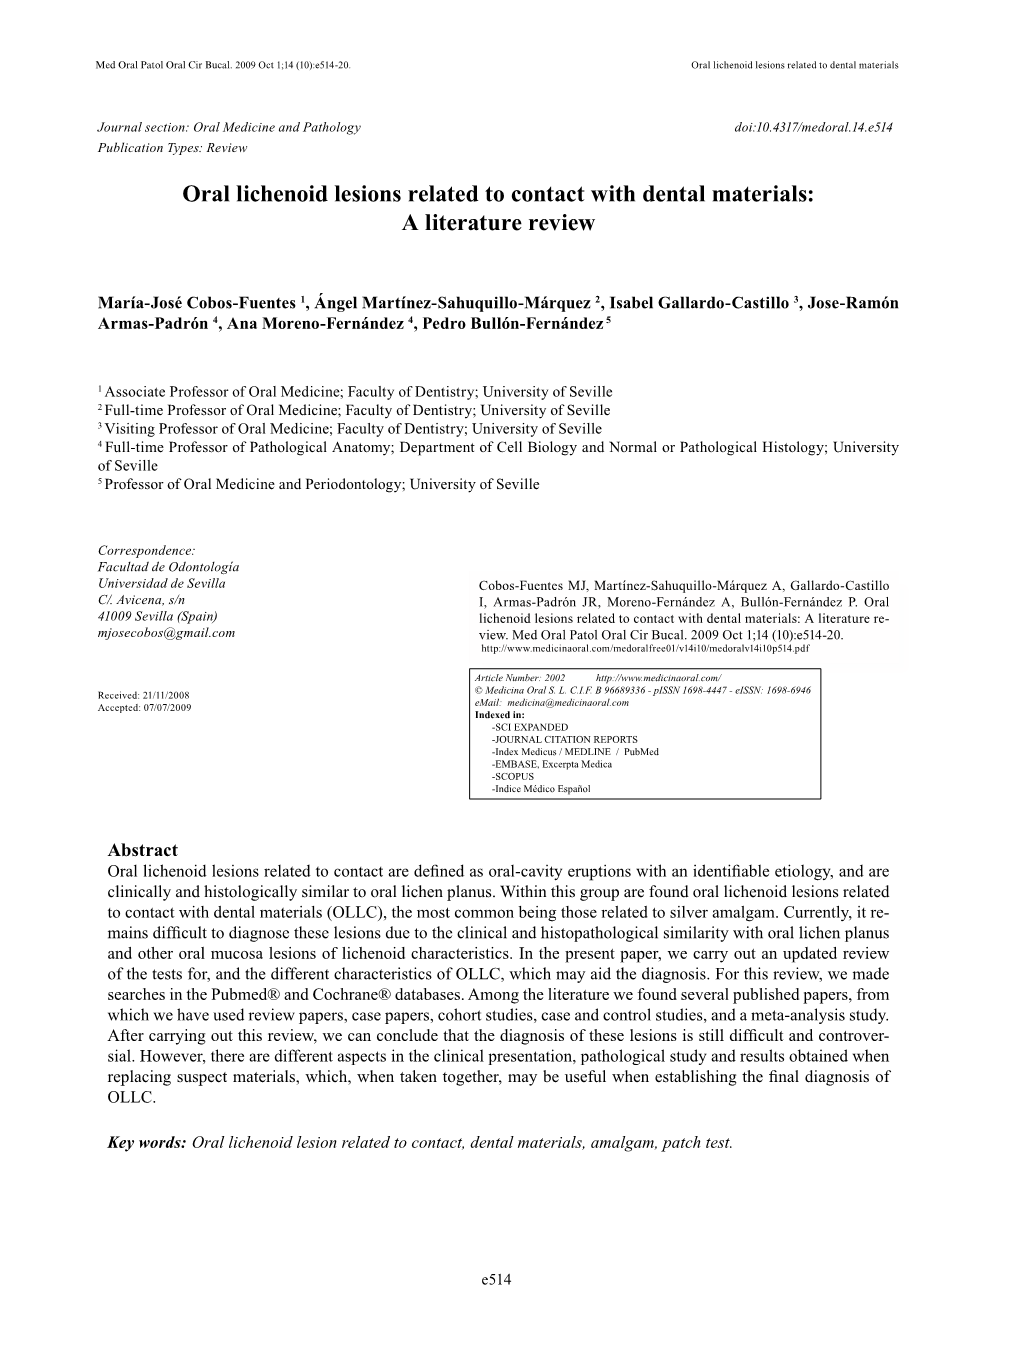 Oral Lichenoid Lesions Related to Contact with Dental Materials: a Literature Review